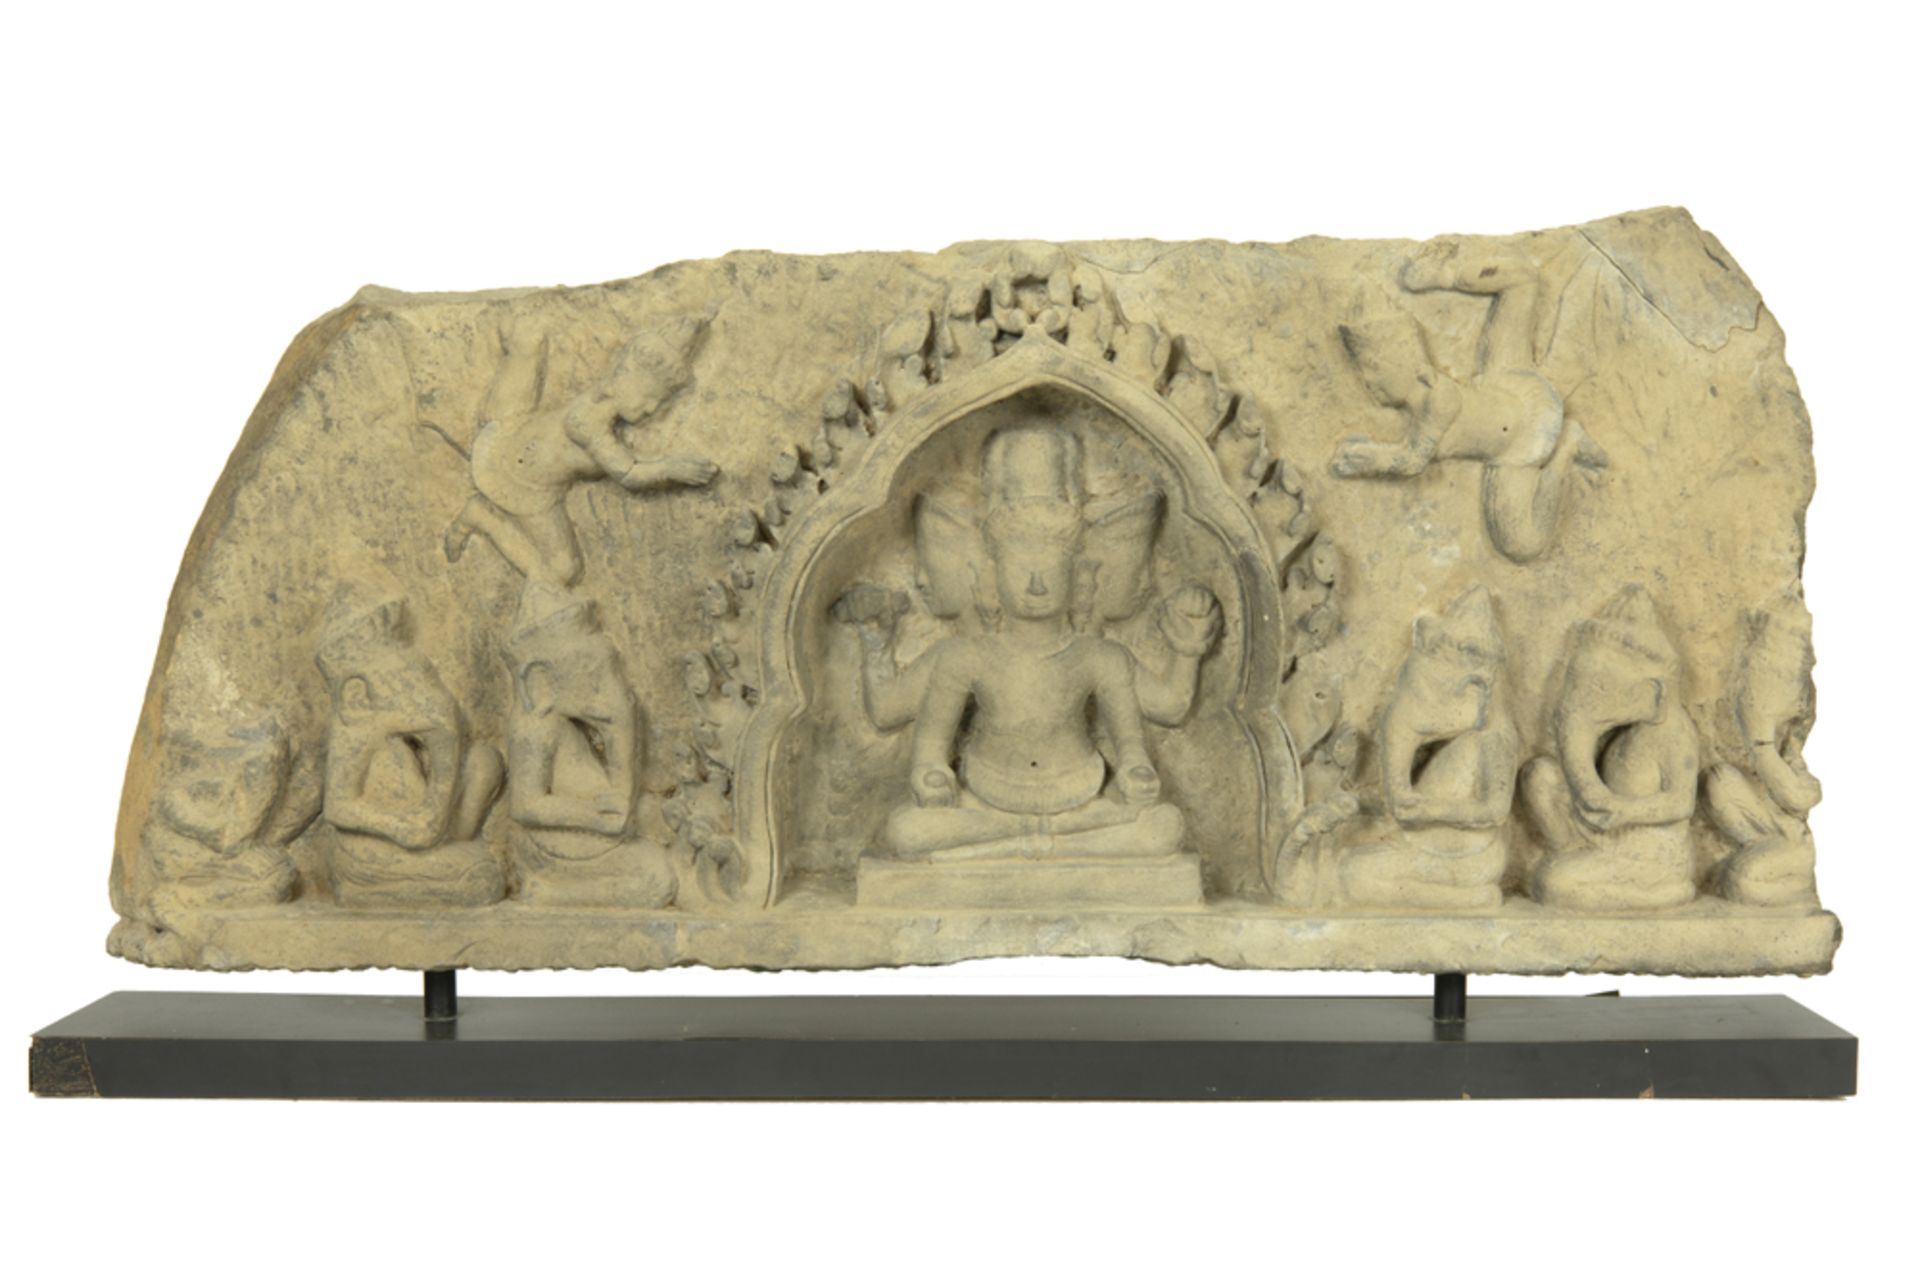 10th/12th Cent. Cambodian Khmer stone lintel with the depecition of the "Creation" with in the